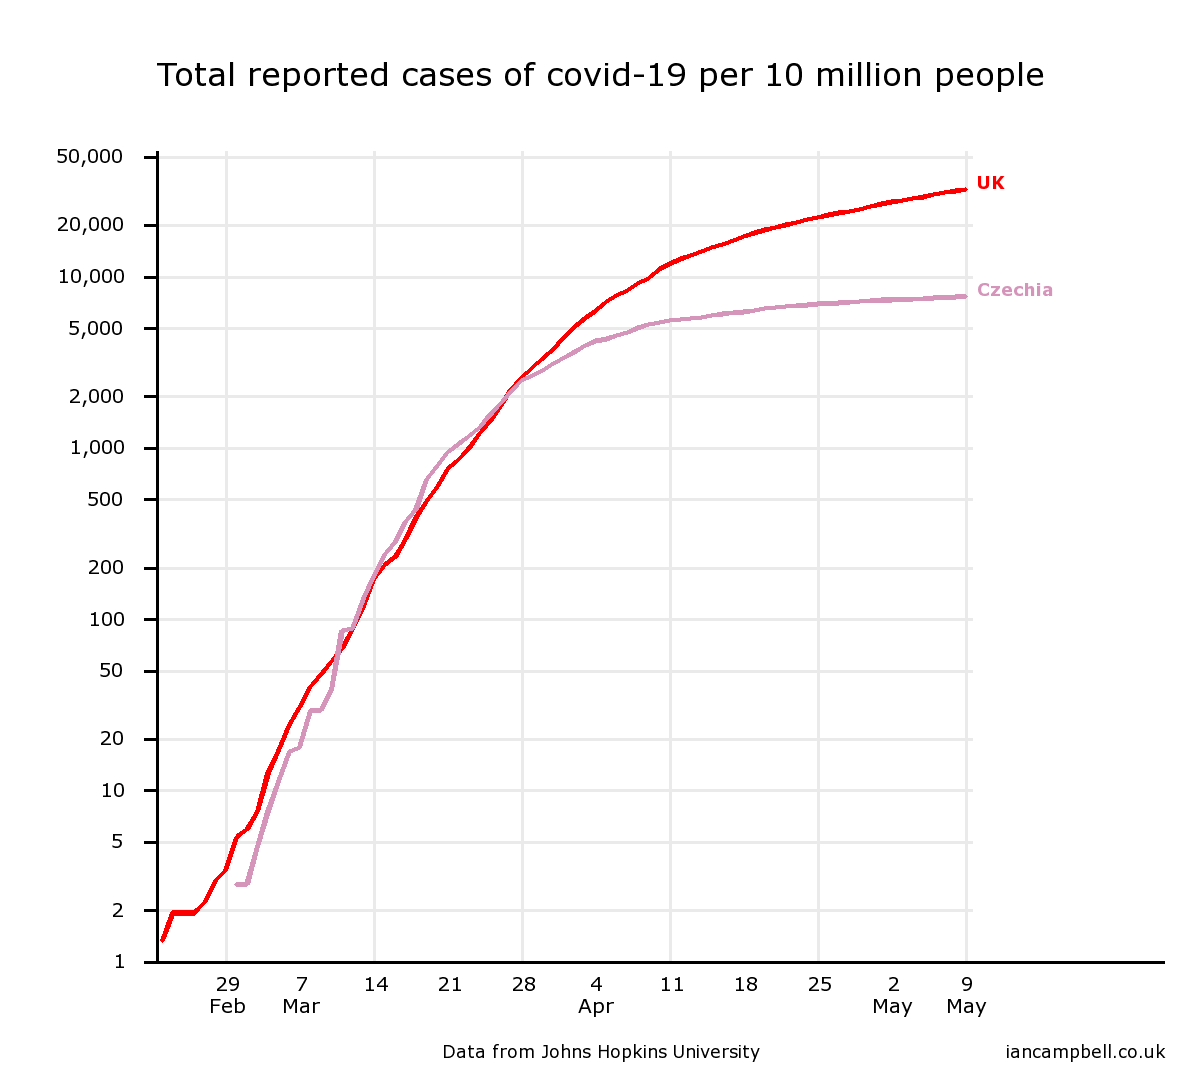 Let's compare the UK (the worst country in the world) with the Czechia (one of the best countries in the world).Until the 28th March, both countries had same amount of cases.